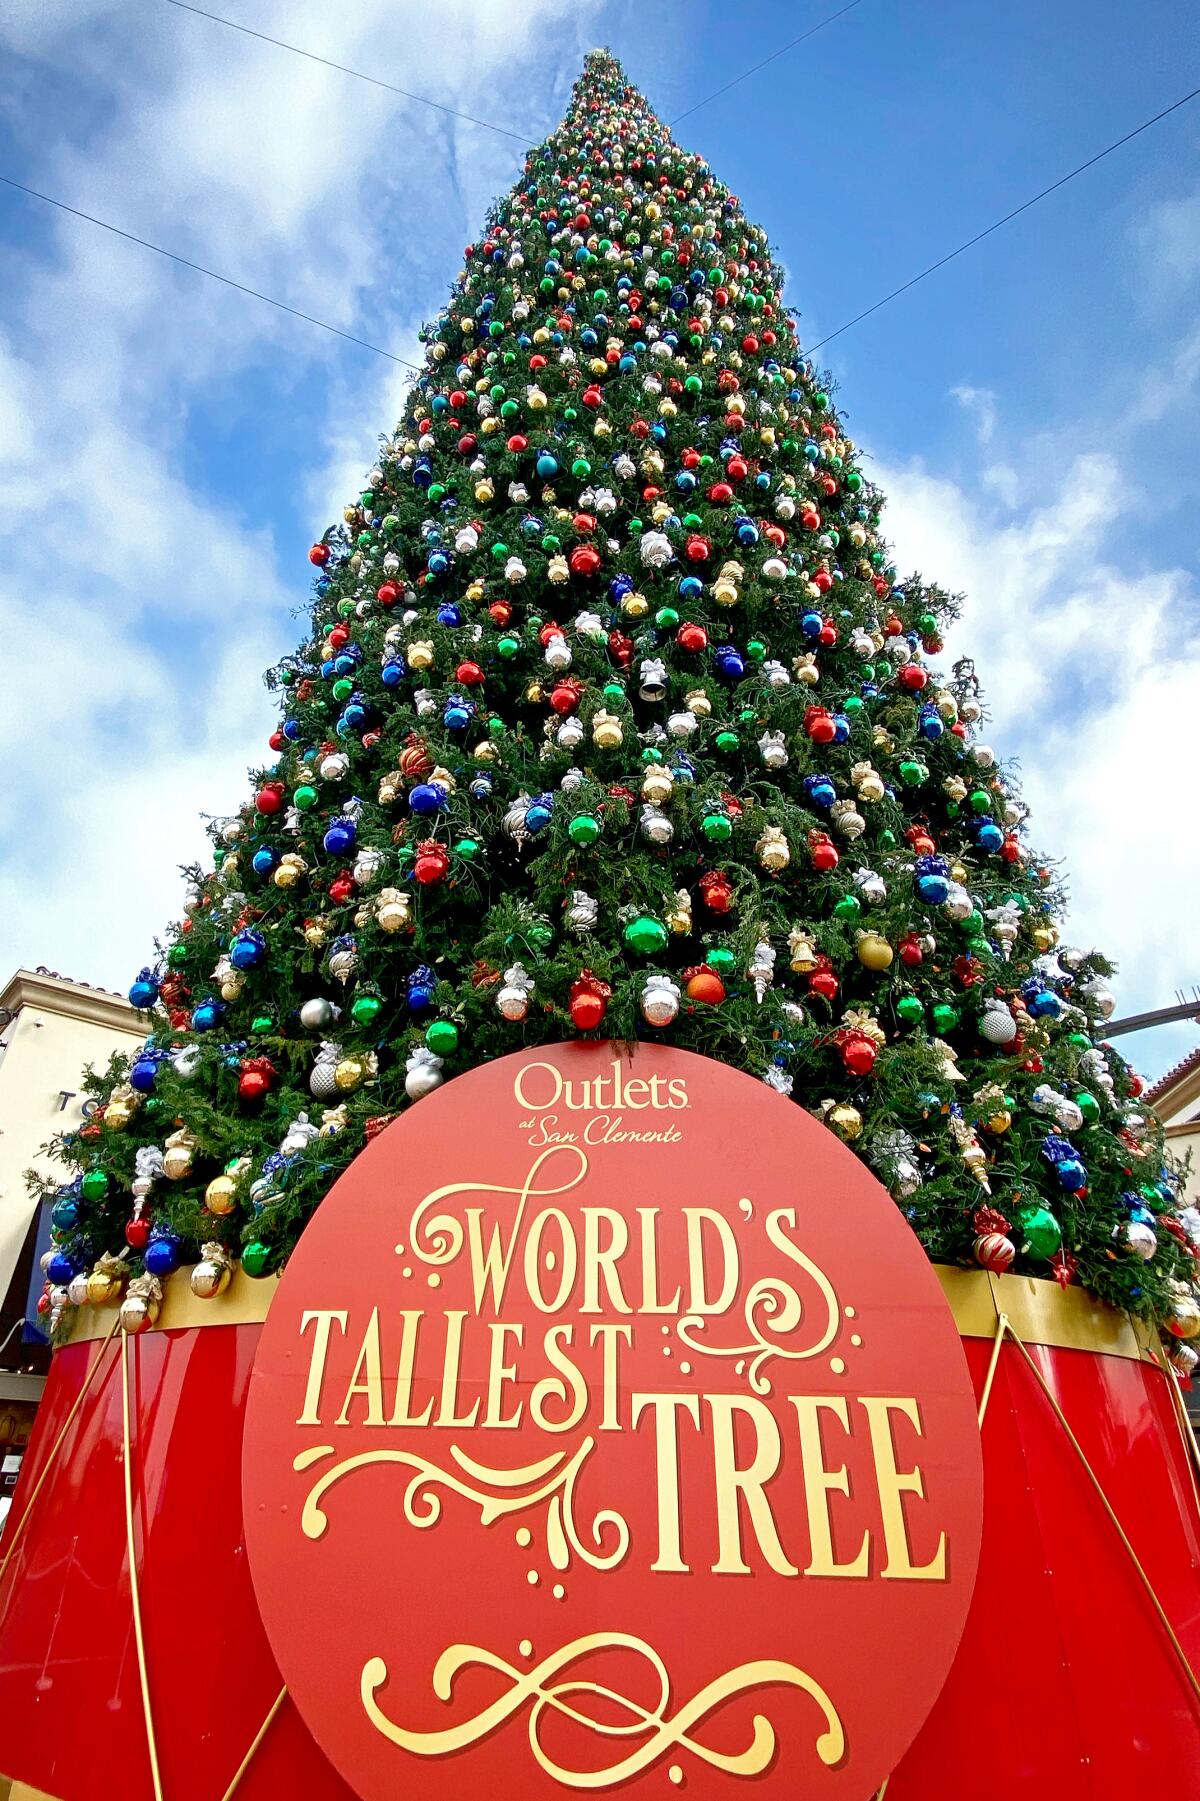 A view of the ornament-covered tree looking up from its base; a sign says "World's tallest tree."